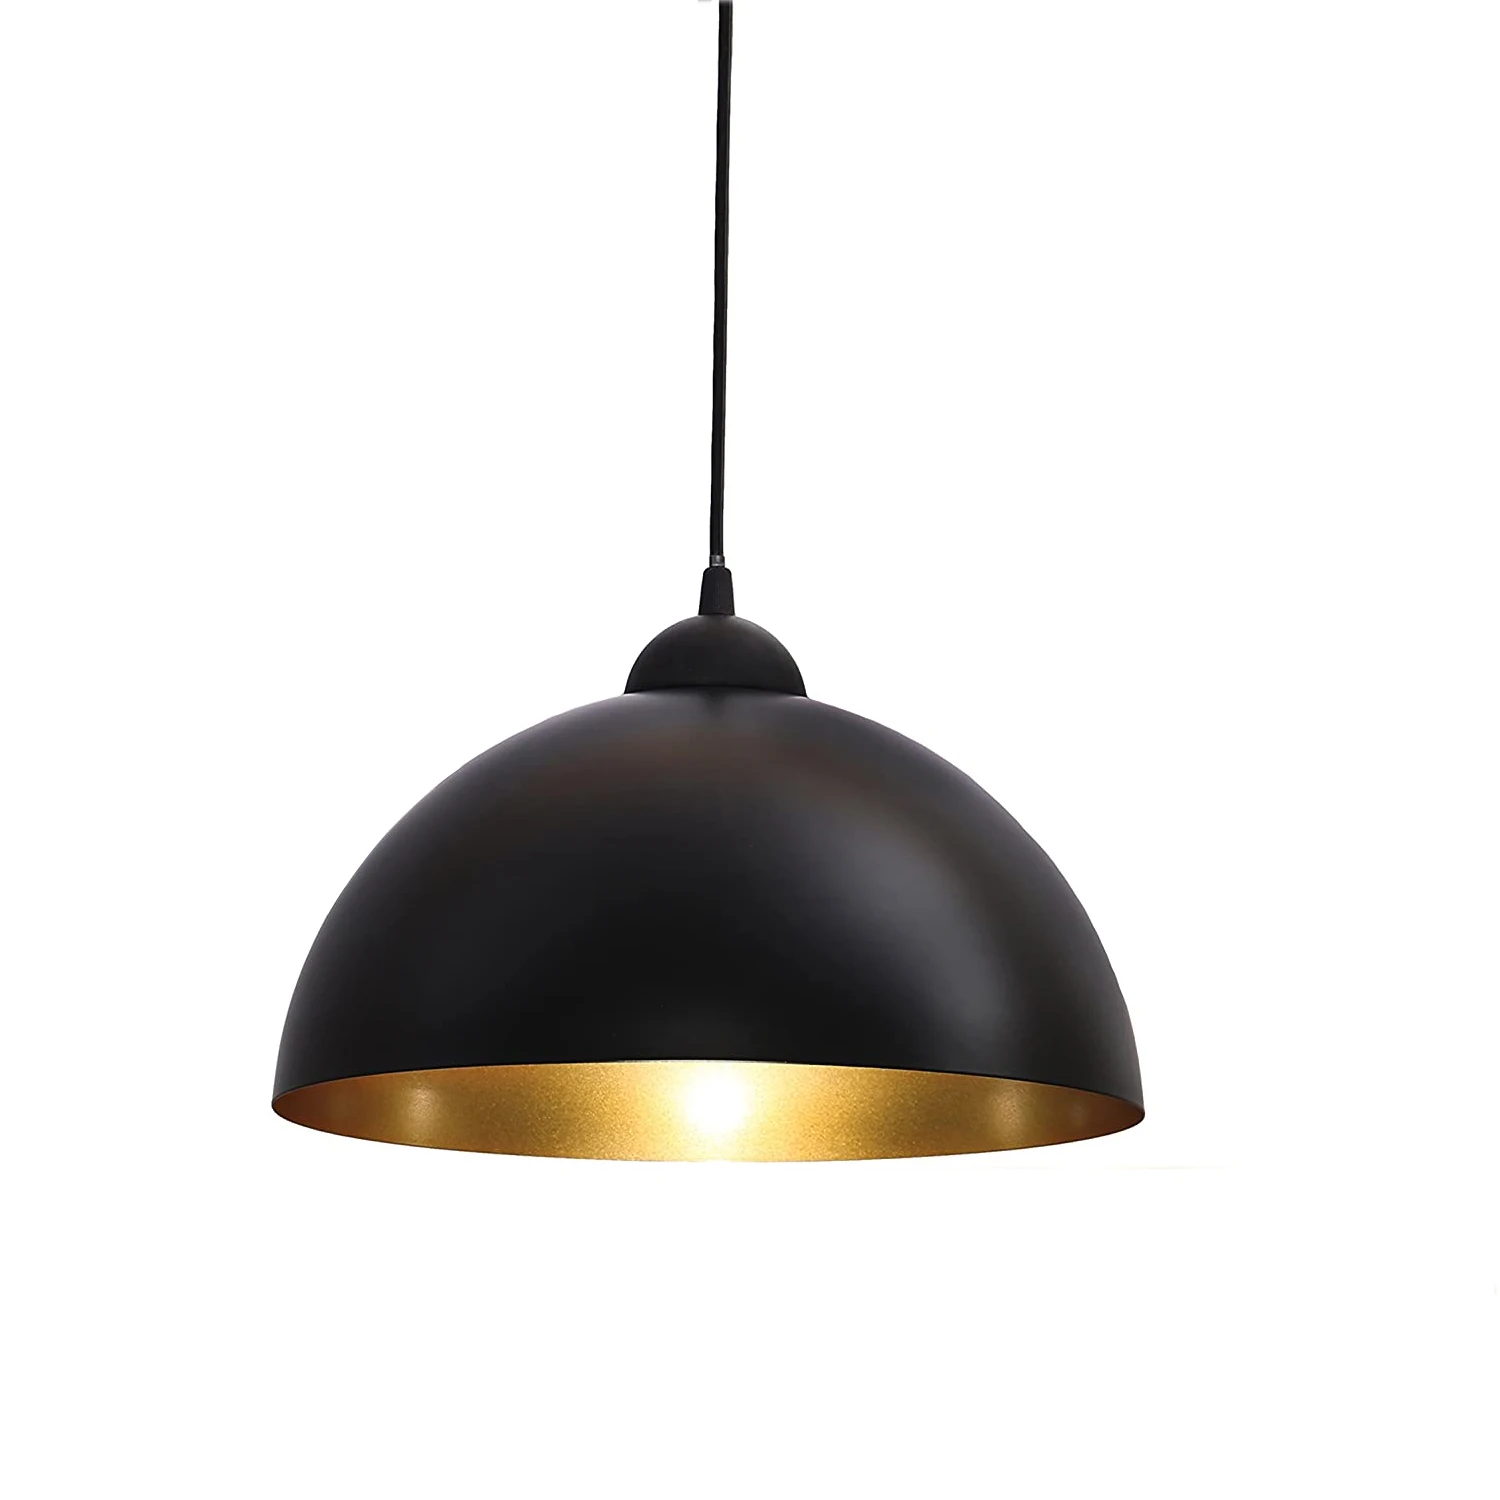 Modern Ceiling Lighting Shade for Bedroom Hallway Office Coffee Shop Black-Golden Ceiling Pendant Light with E27 Base Retro Industrial Ceiling Lighting No Bulb 